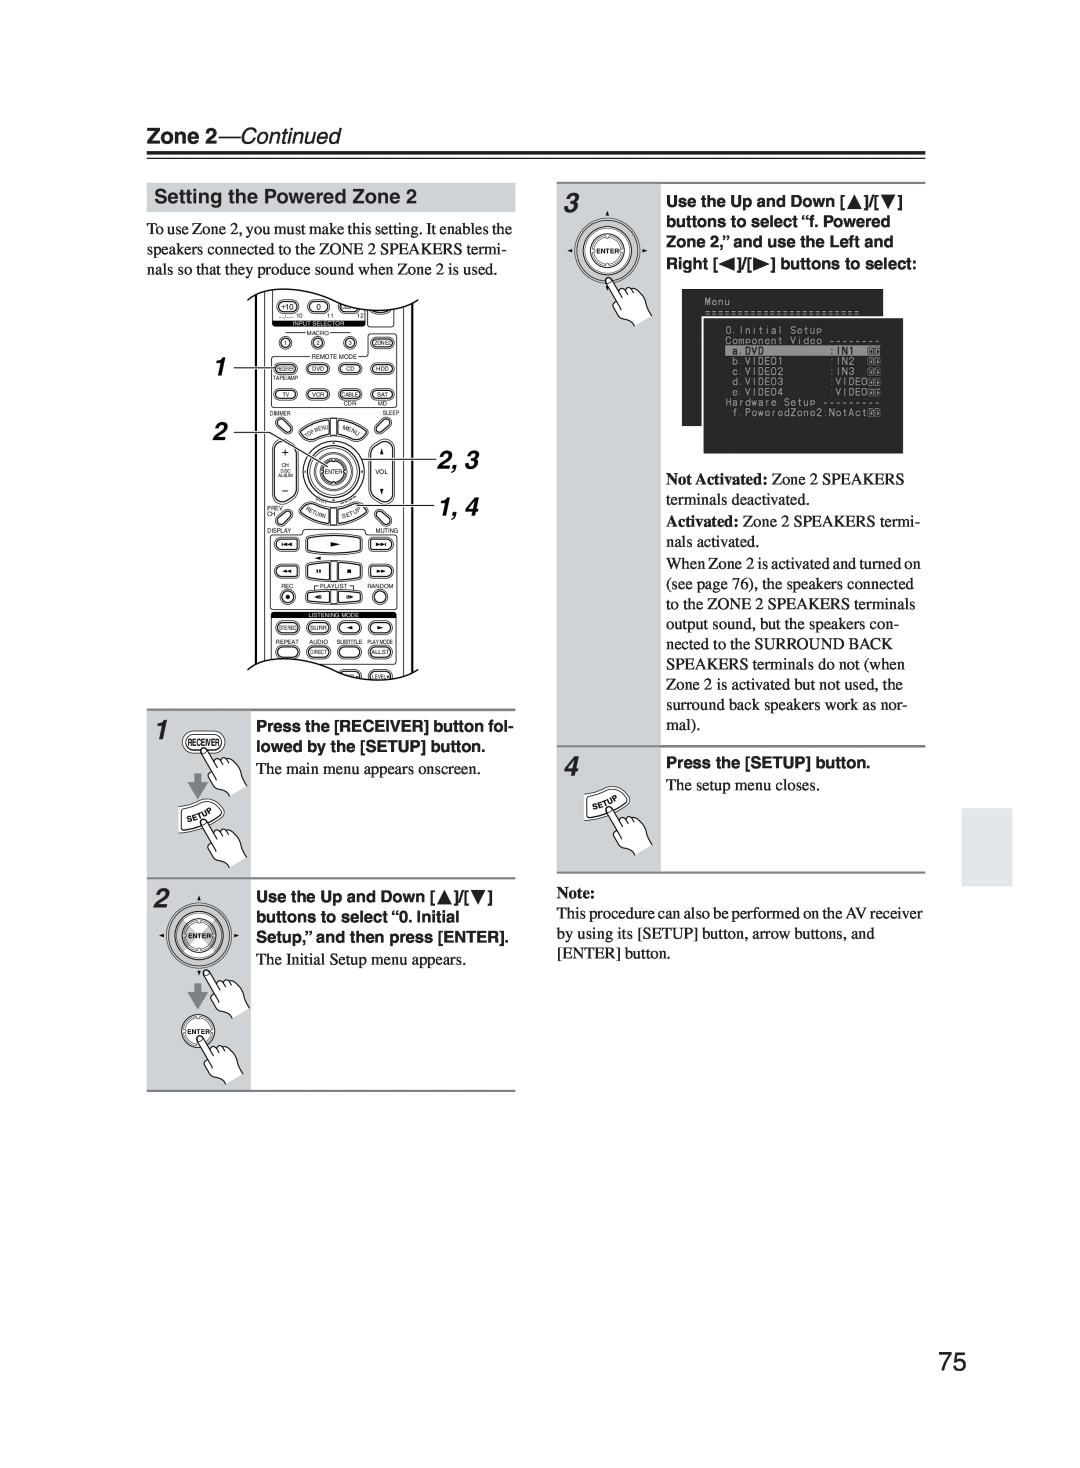 Onkyo TX-SR603X instruction manual Zone 2—Continued, Setting the Powered Zone 